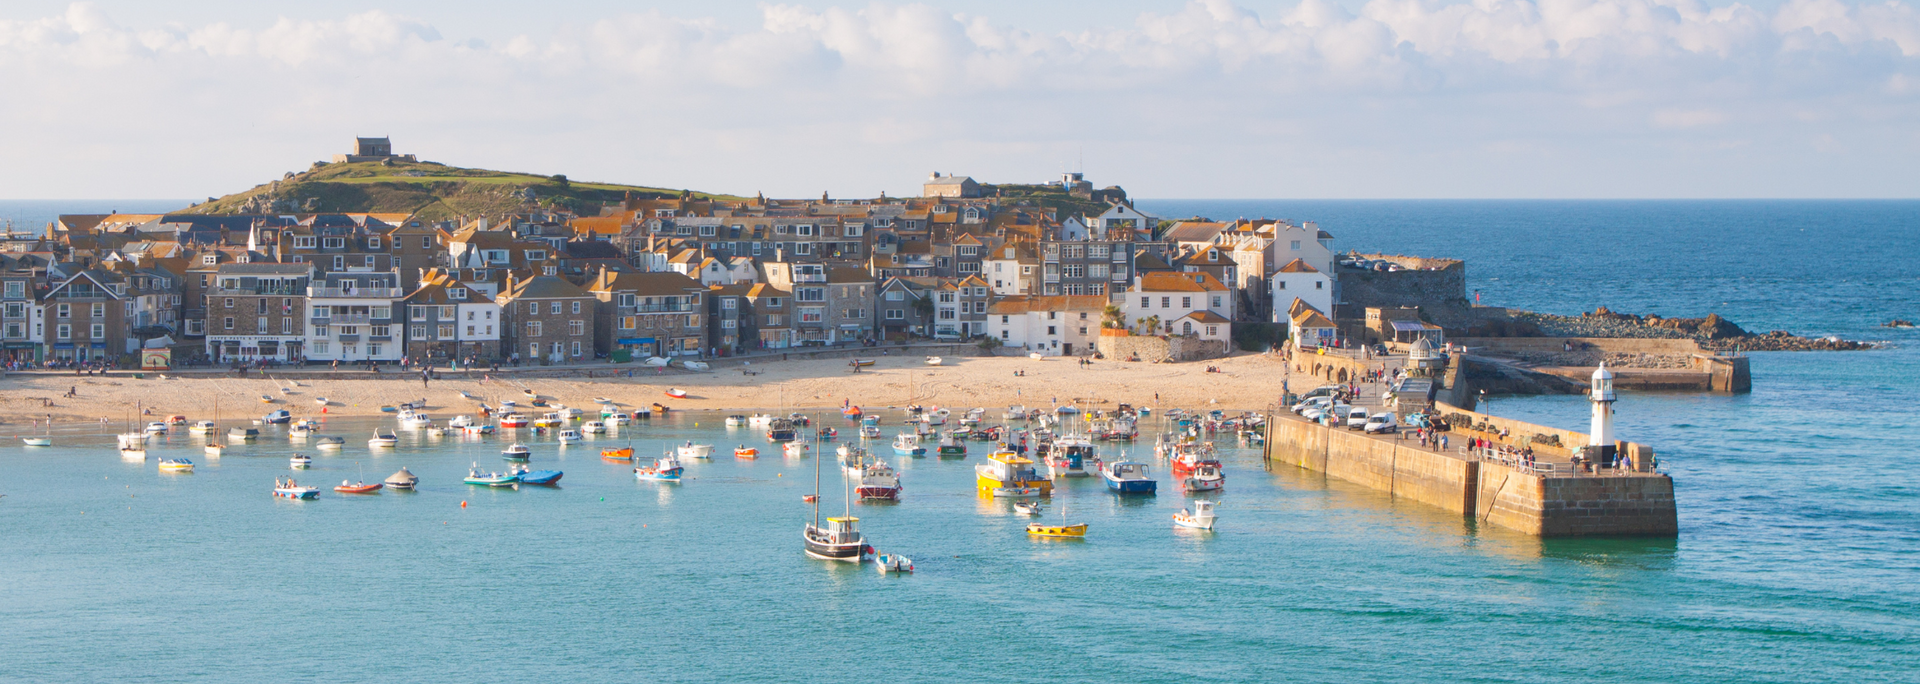 Picture of St Ives, Cornwall.